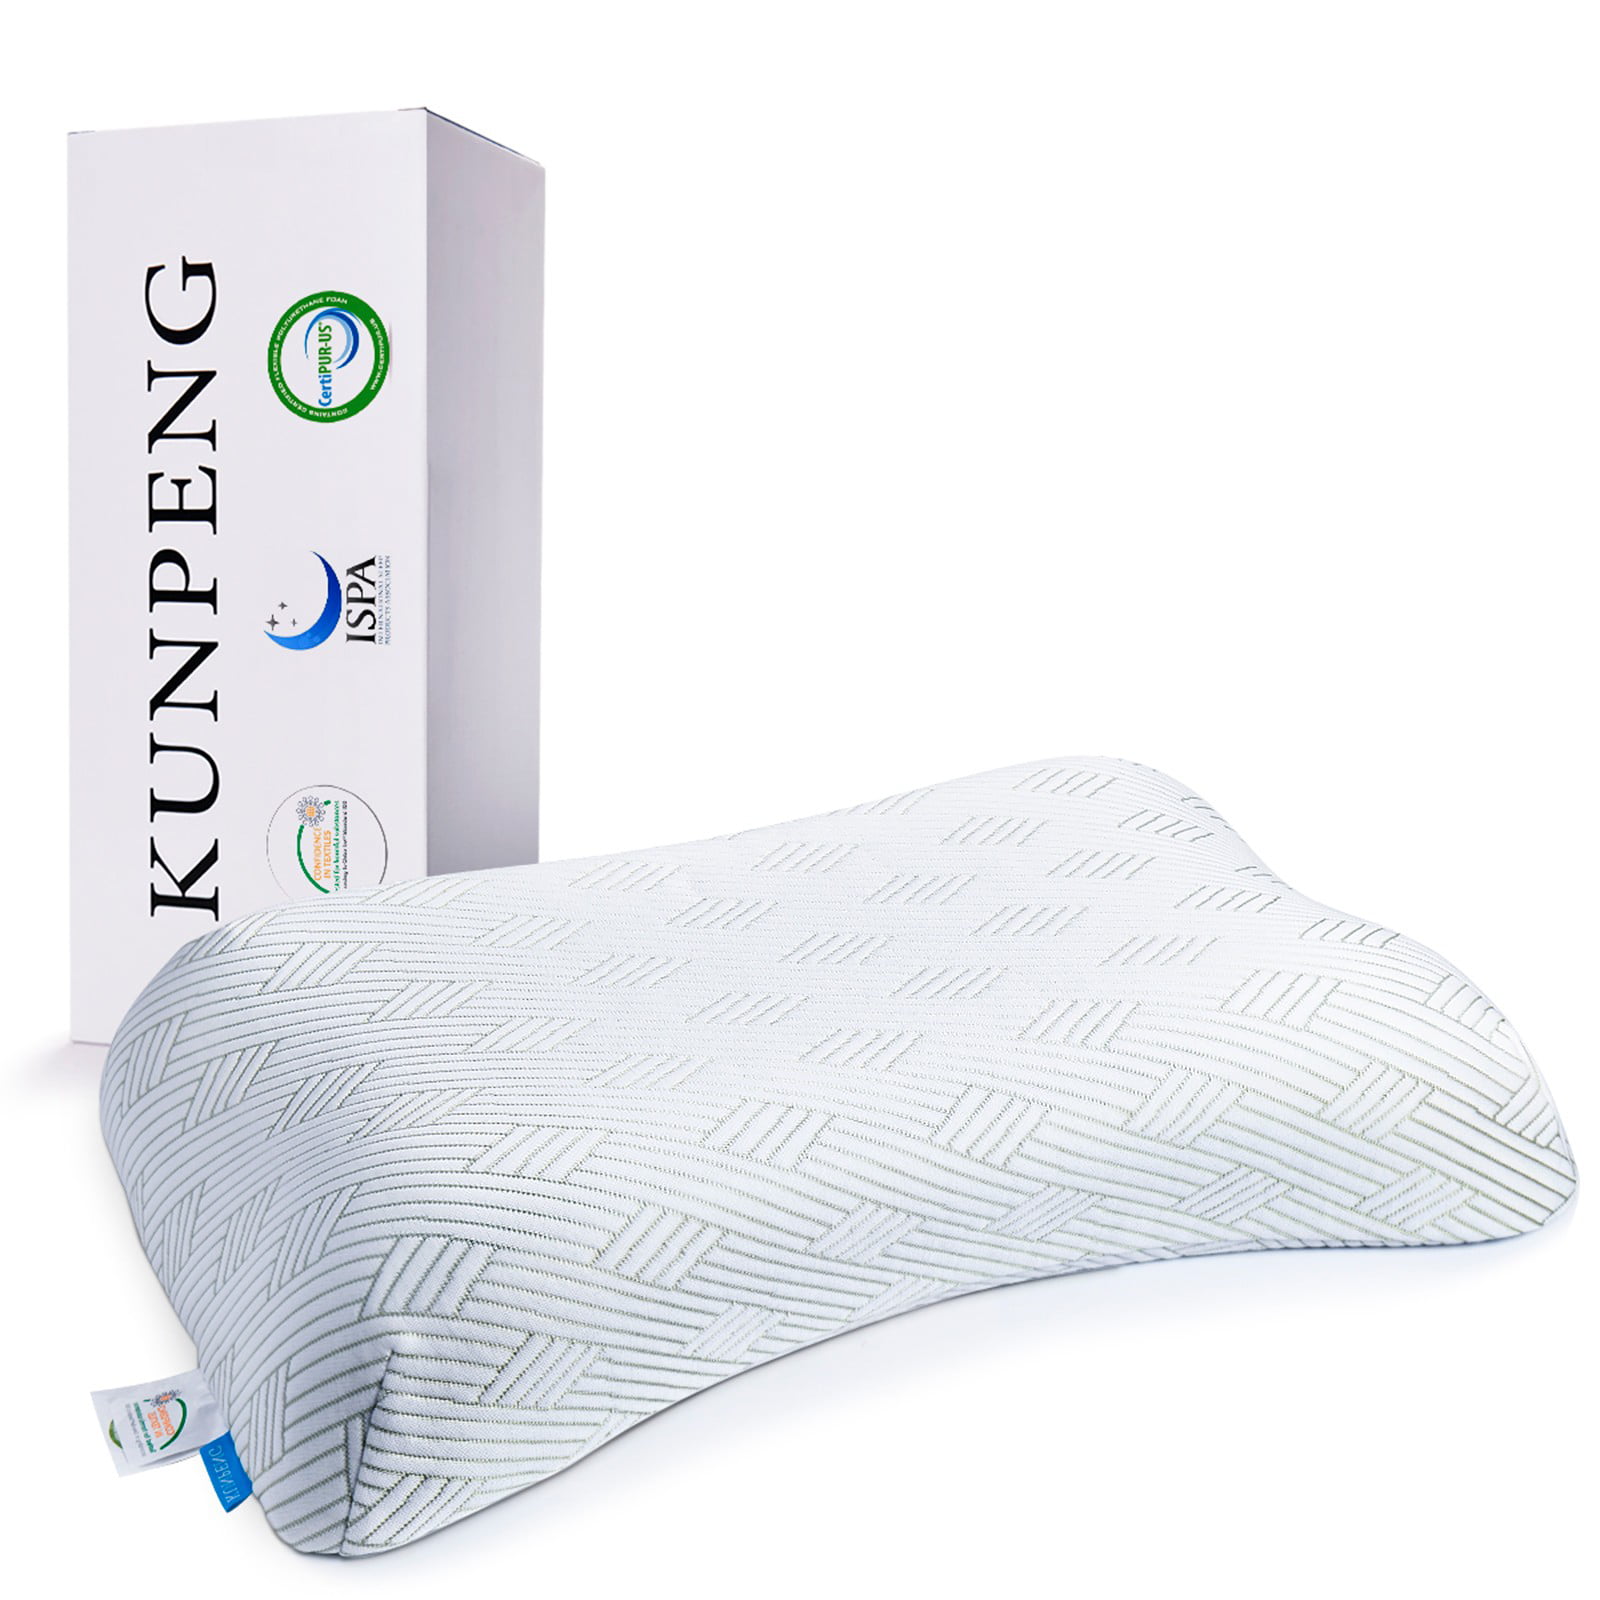 New Gel Memory Foam Pillow with Cooling Washable Removable Cover Good for Back 